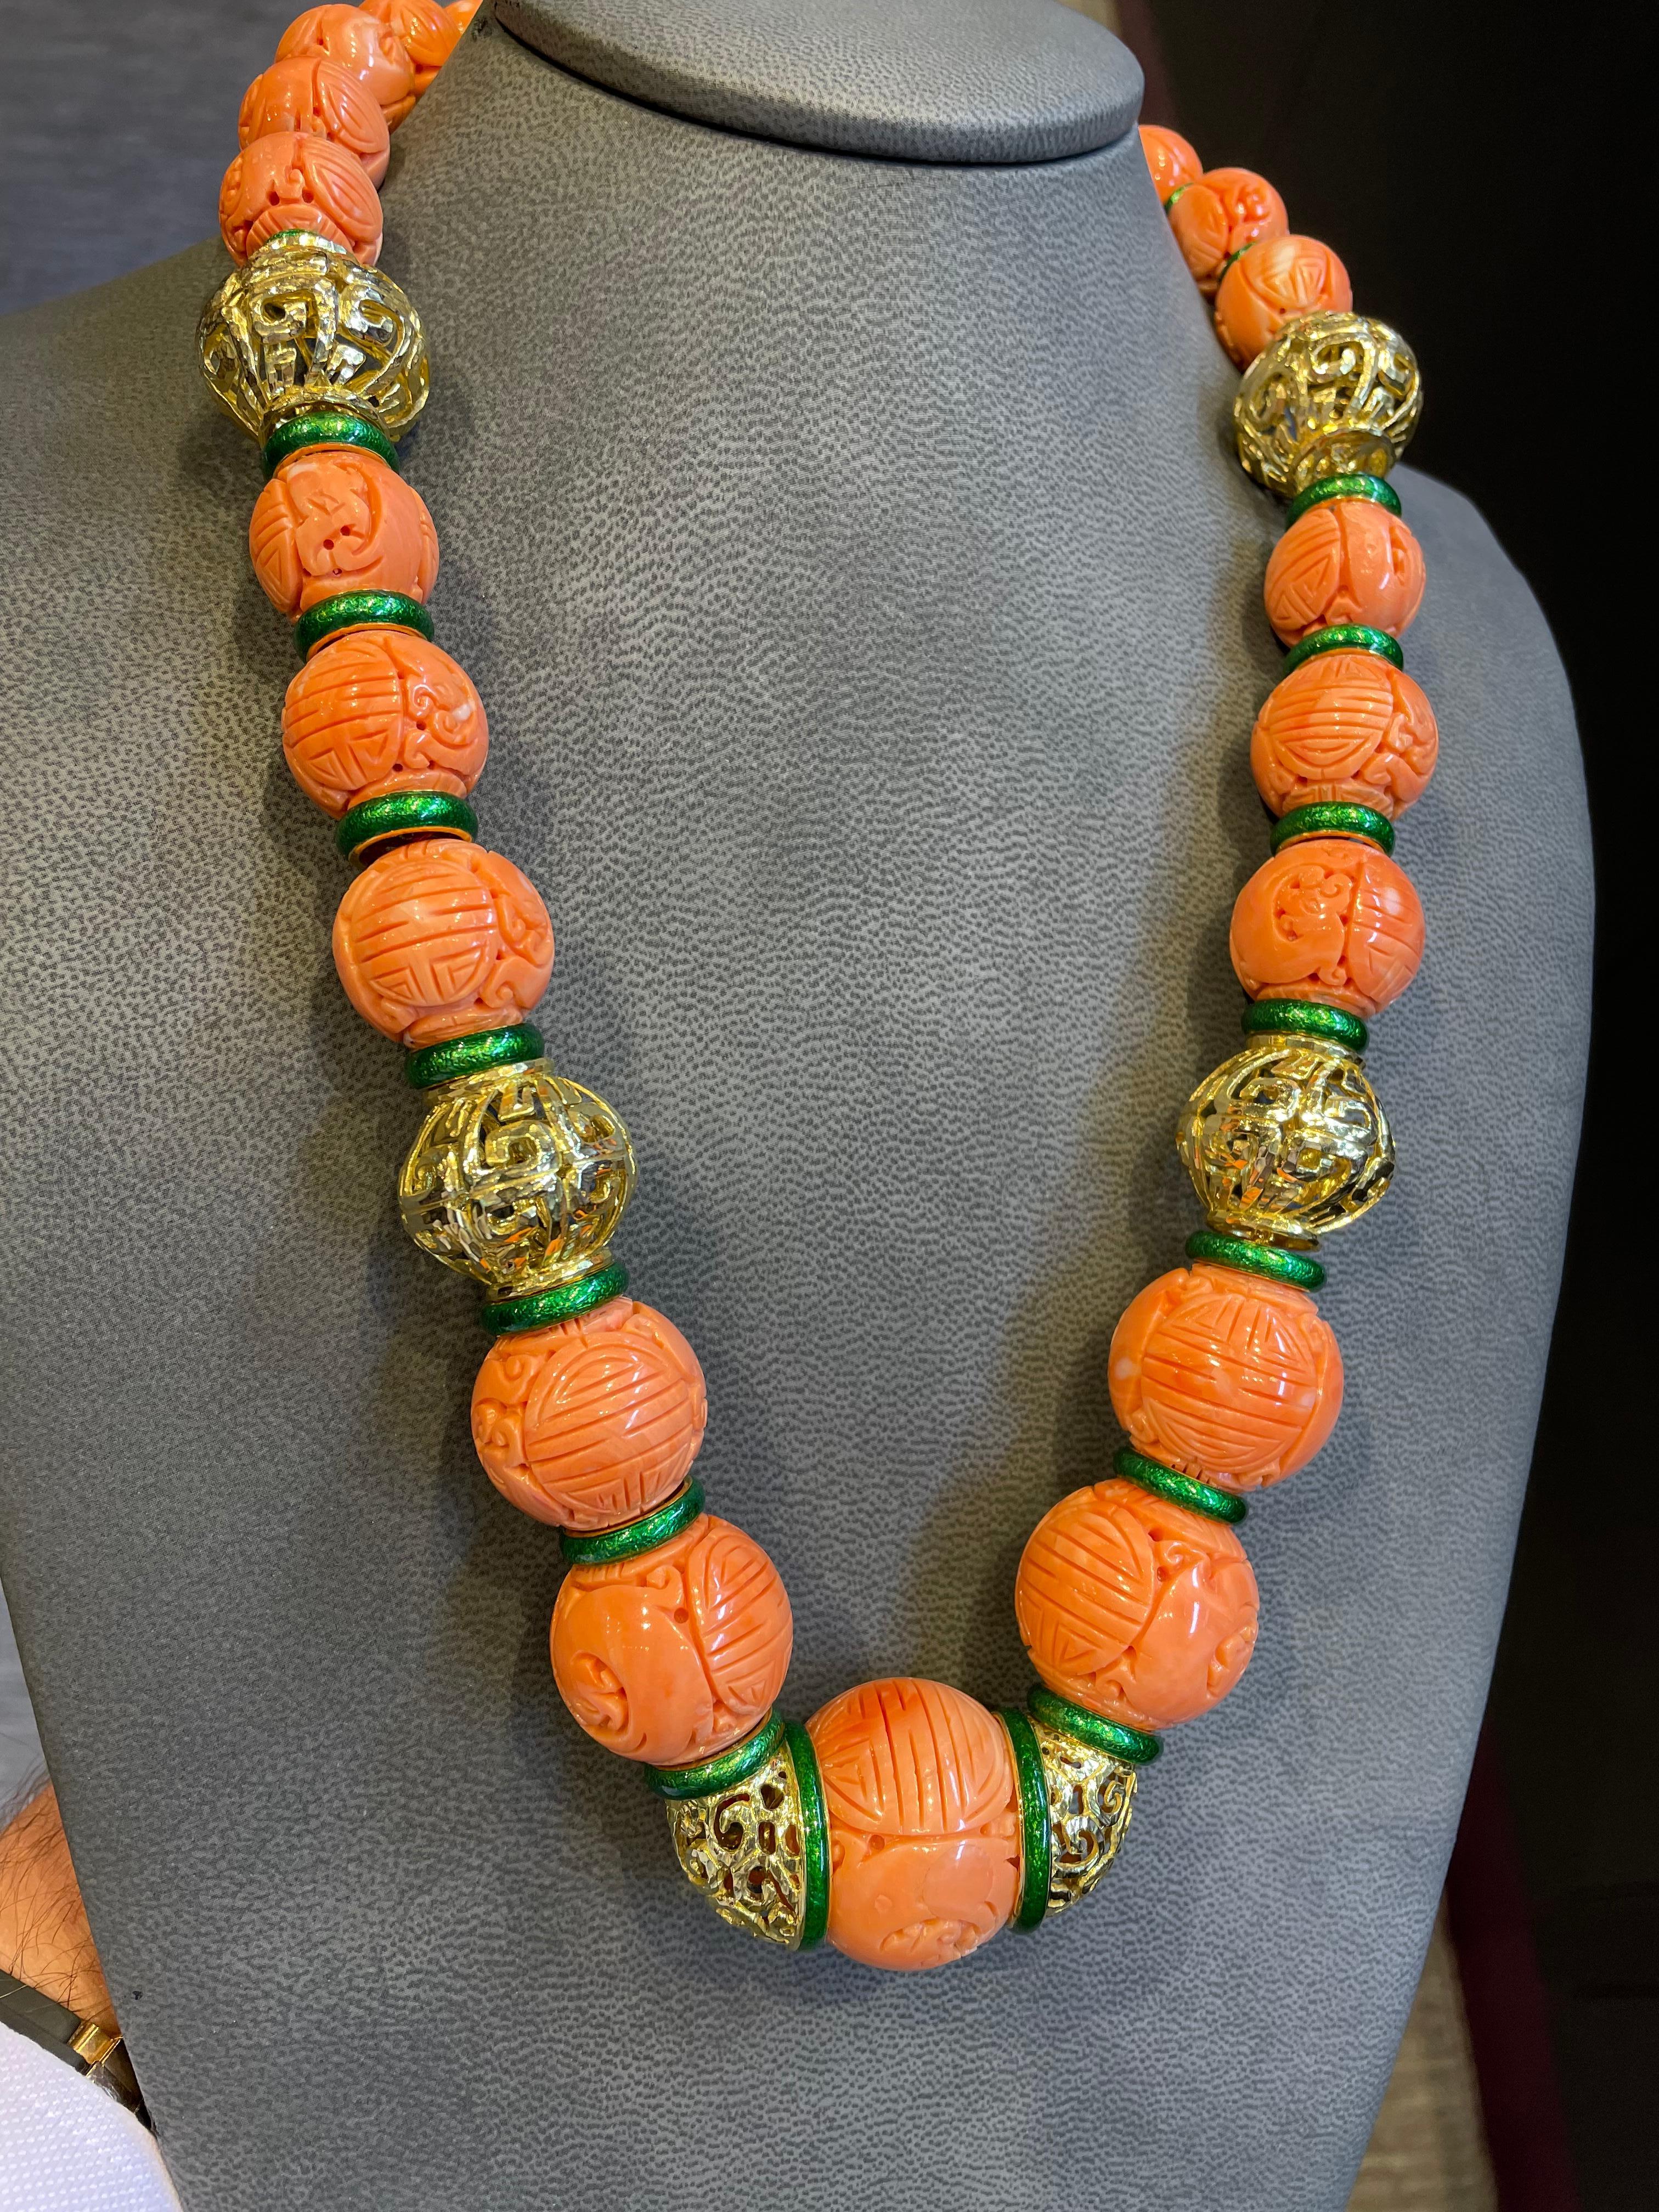 David Webb Carved Coral Necklace,

Set with museum quality large size antique carved Chinese coral beads.

Four sizes of carved coral beads:
Coral beads size:
large-30mm
medium-25mm
small-20mm
xs-17.5mm

18 karat Hammered gold & green enamel